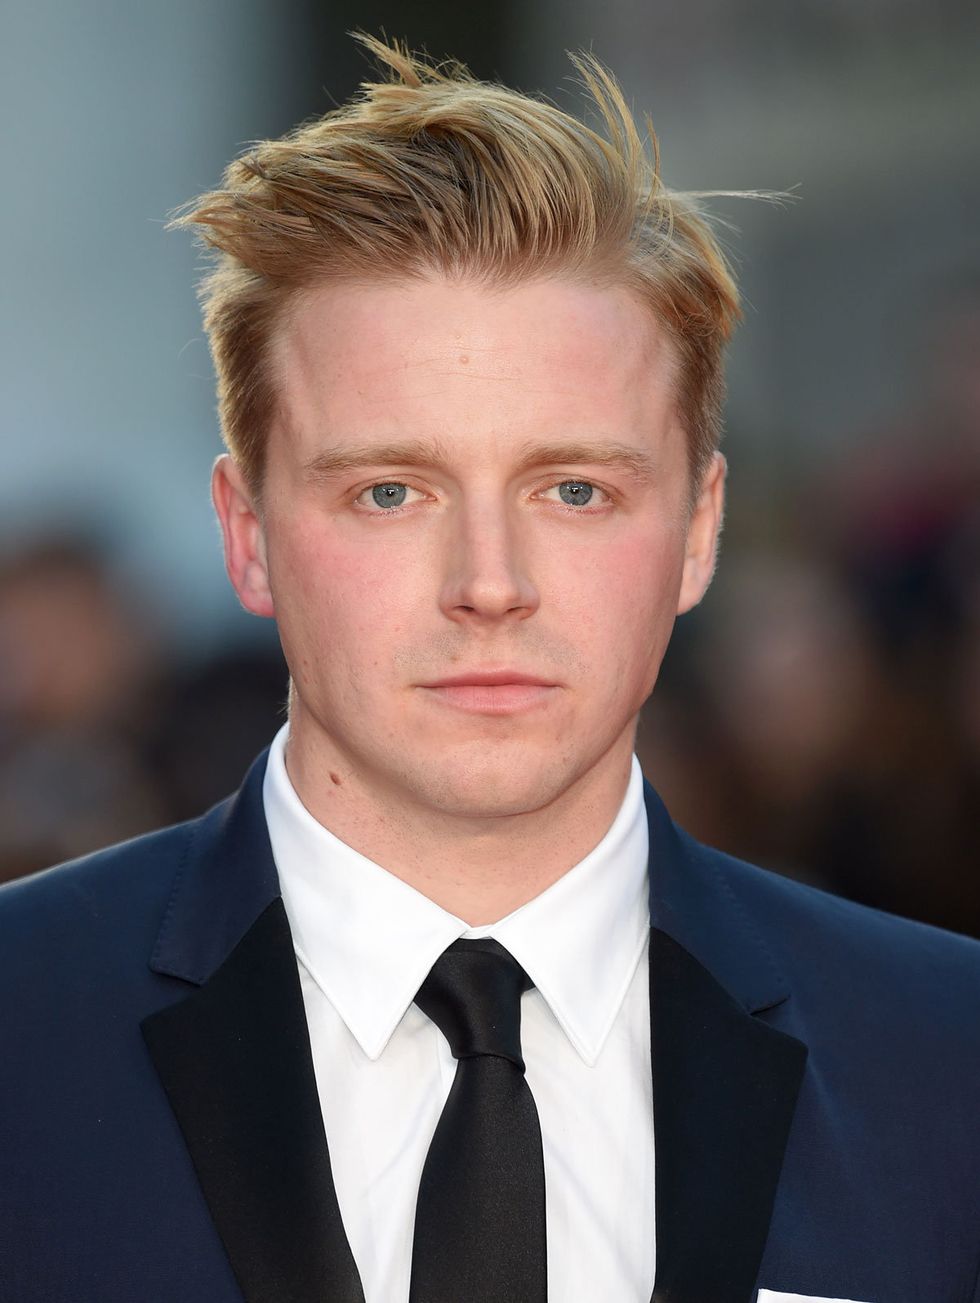 Hair, Face, Forehead, Eyebrow, Hairstyle, Chin, Blond, Suit, White-collar worker, Premiere, 